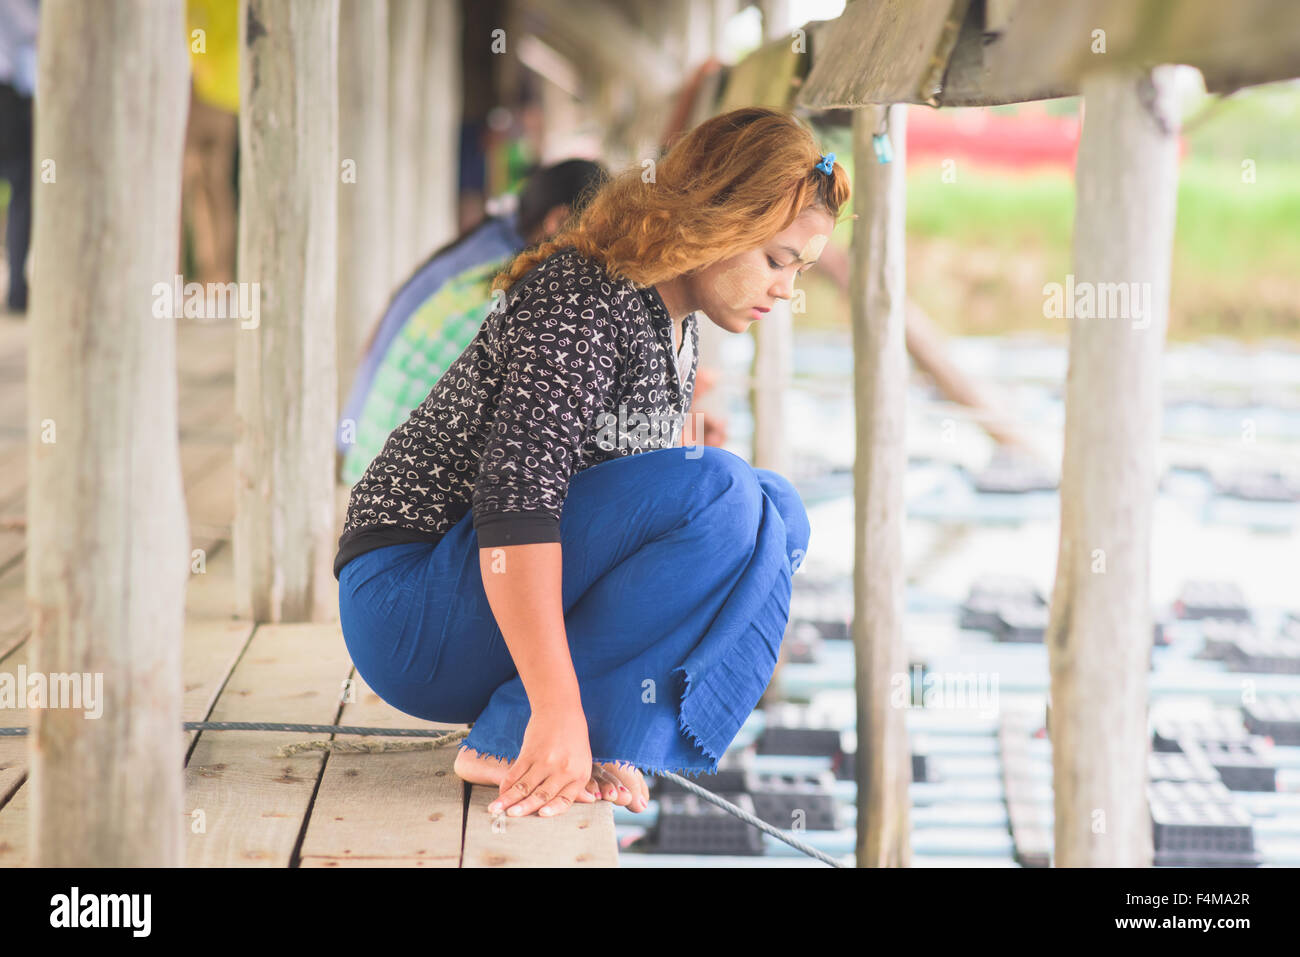 Women checking the cages at a soft shell crab farm in Myeik, a township in the Tanintharyi Region, Southern Myanmar. Stock Photo